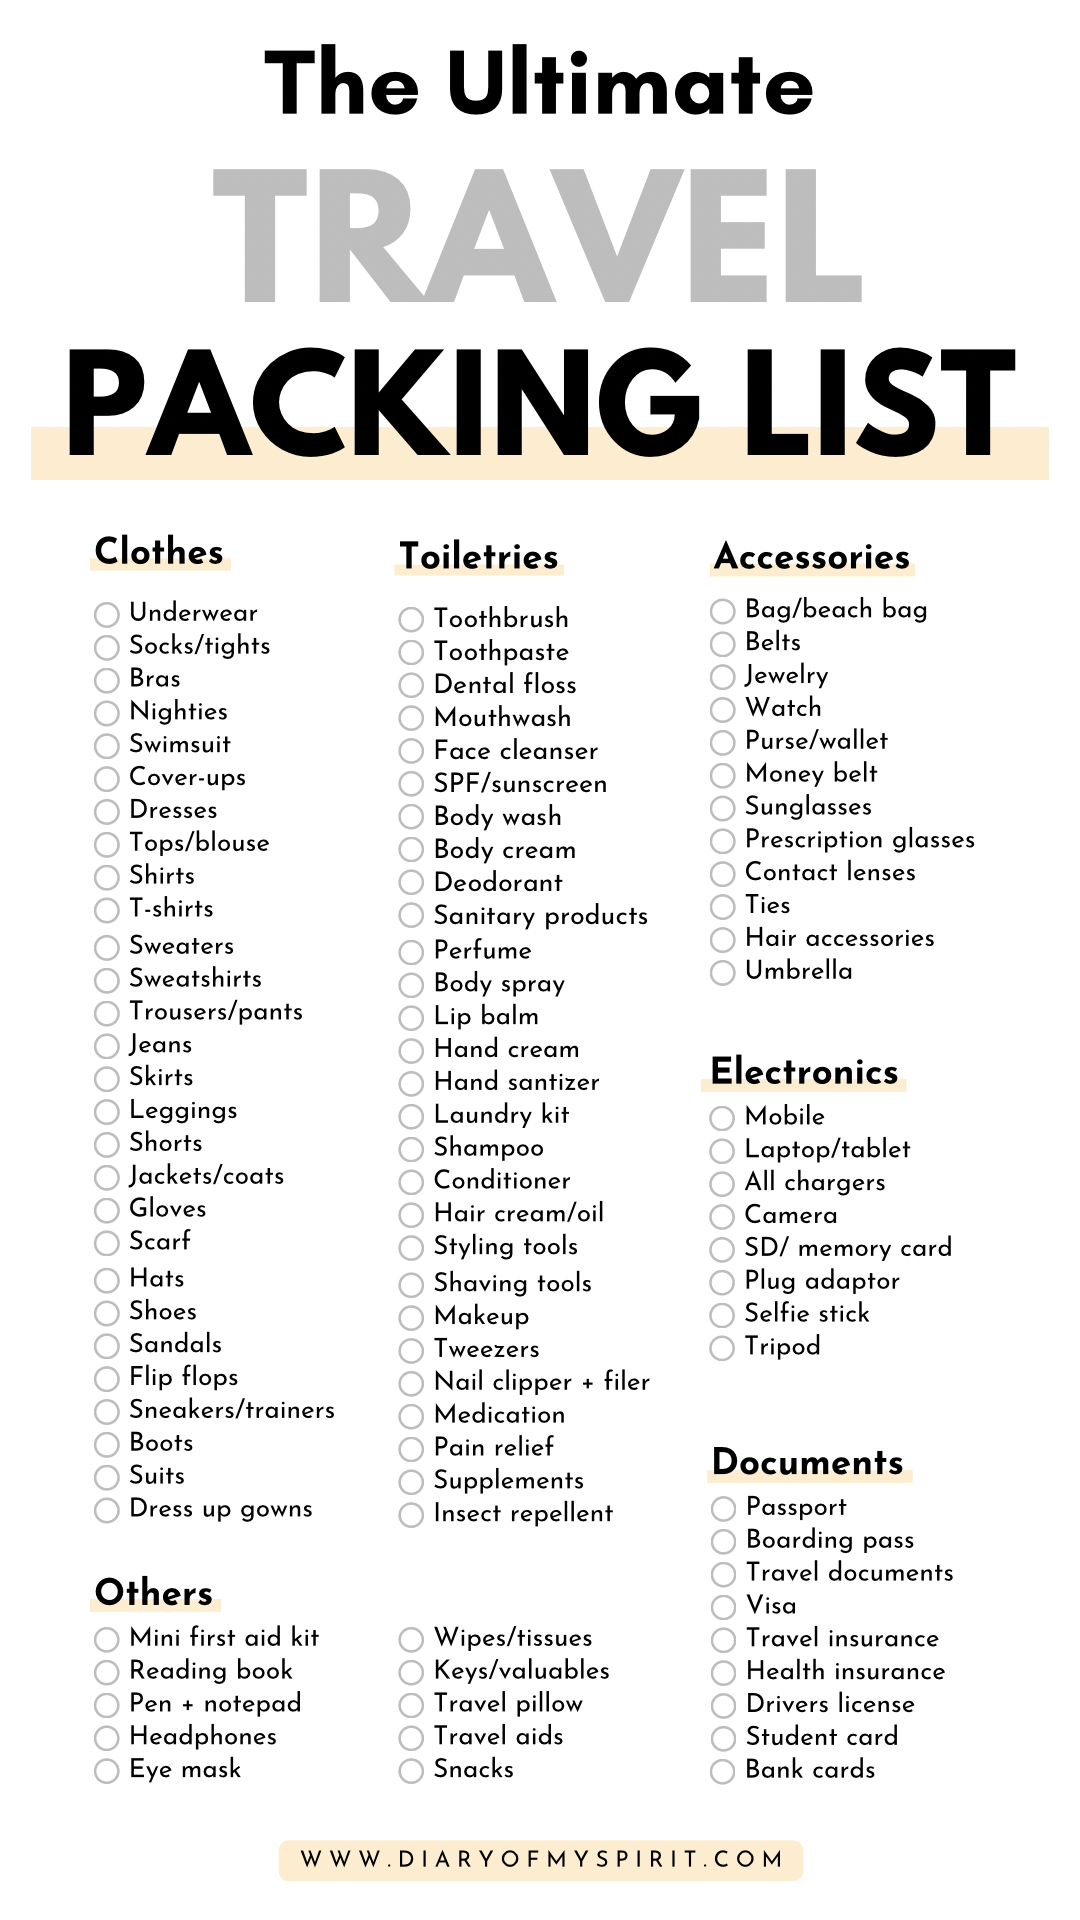 The ultimate packing list for travel